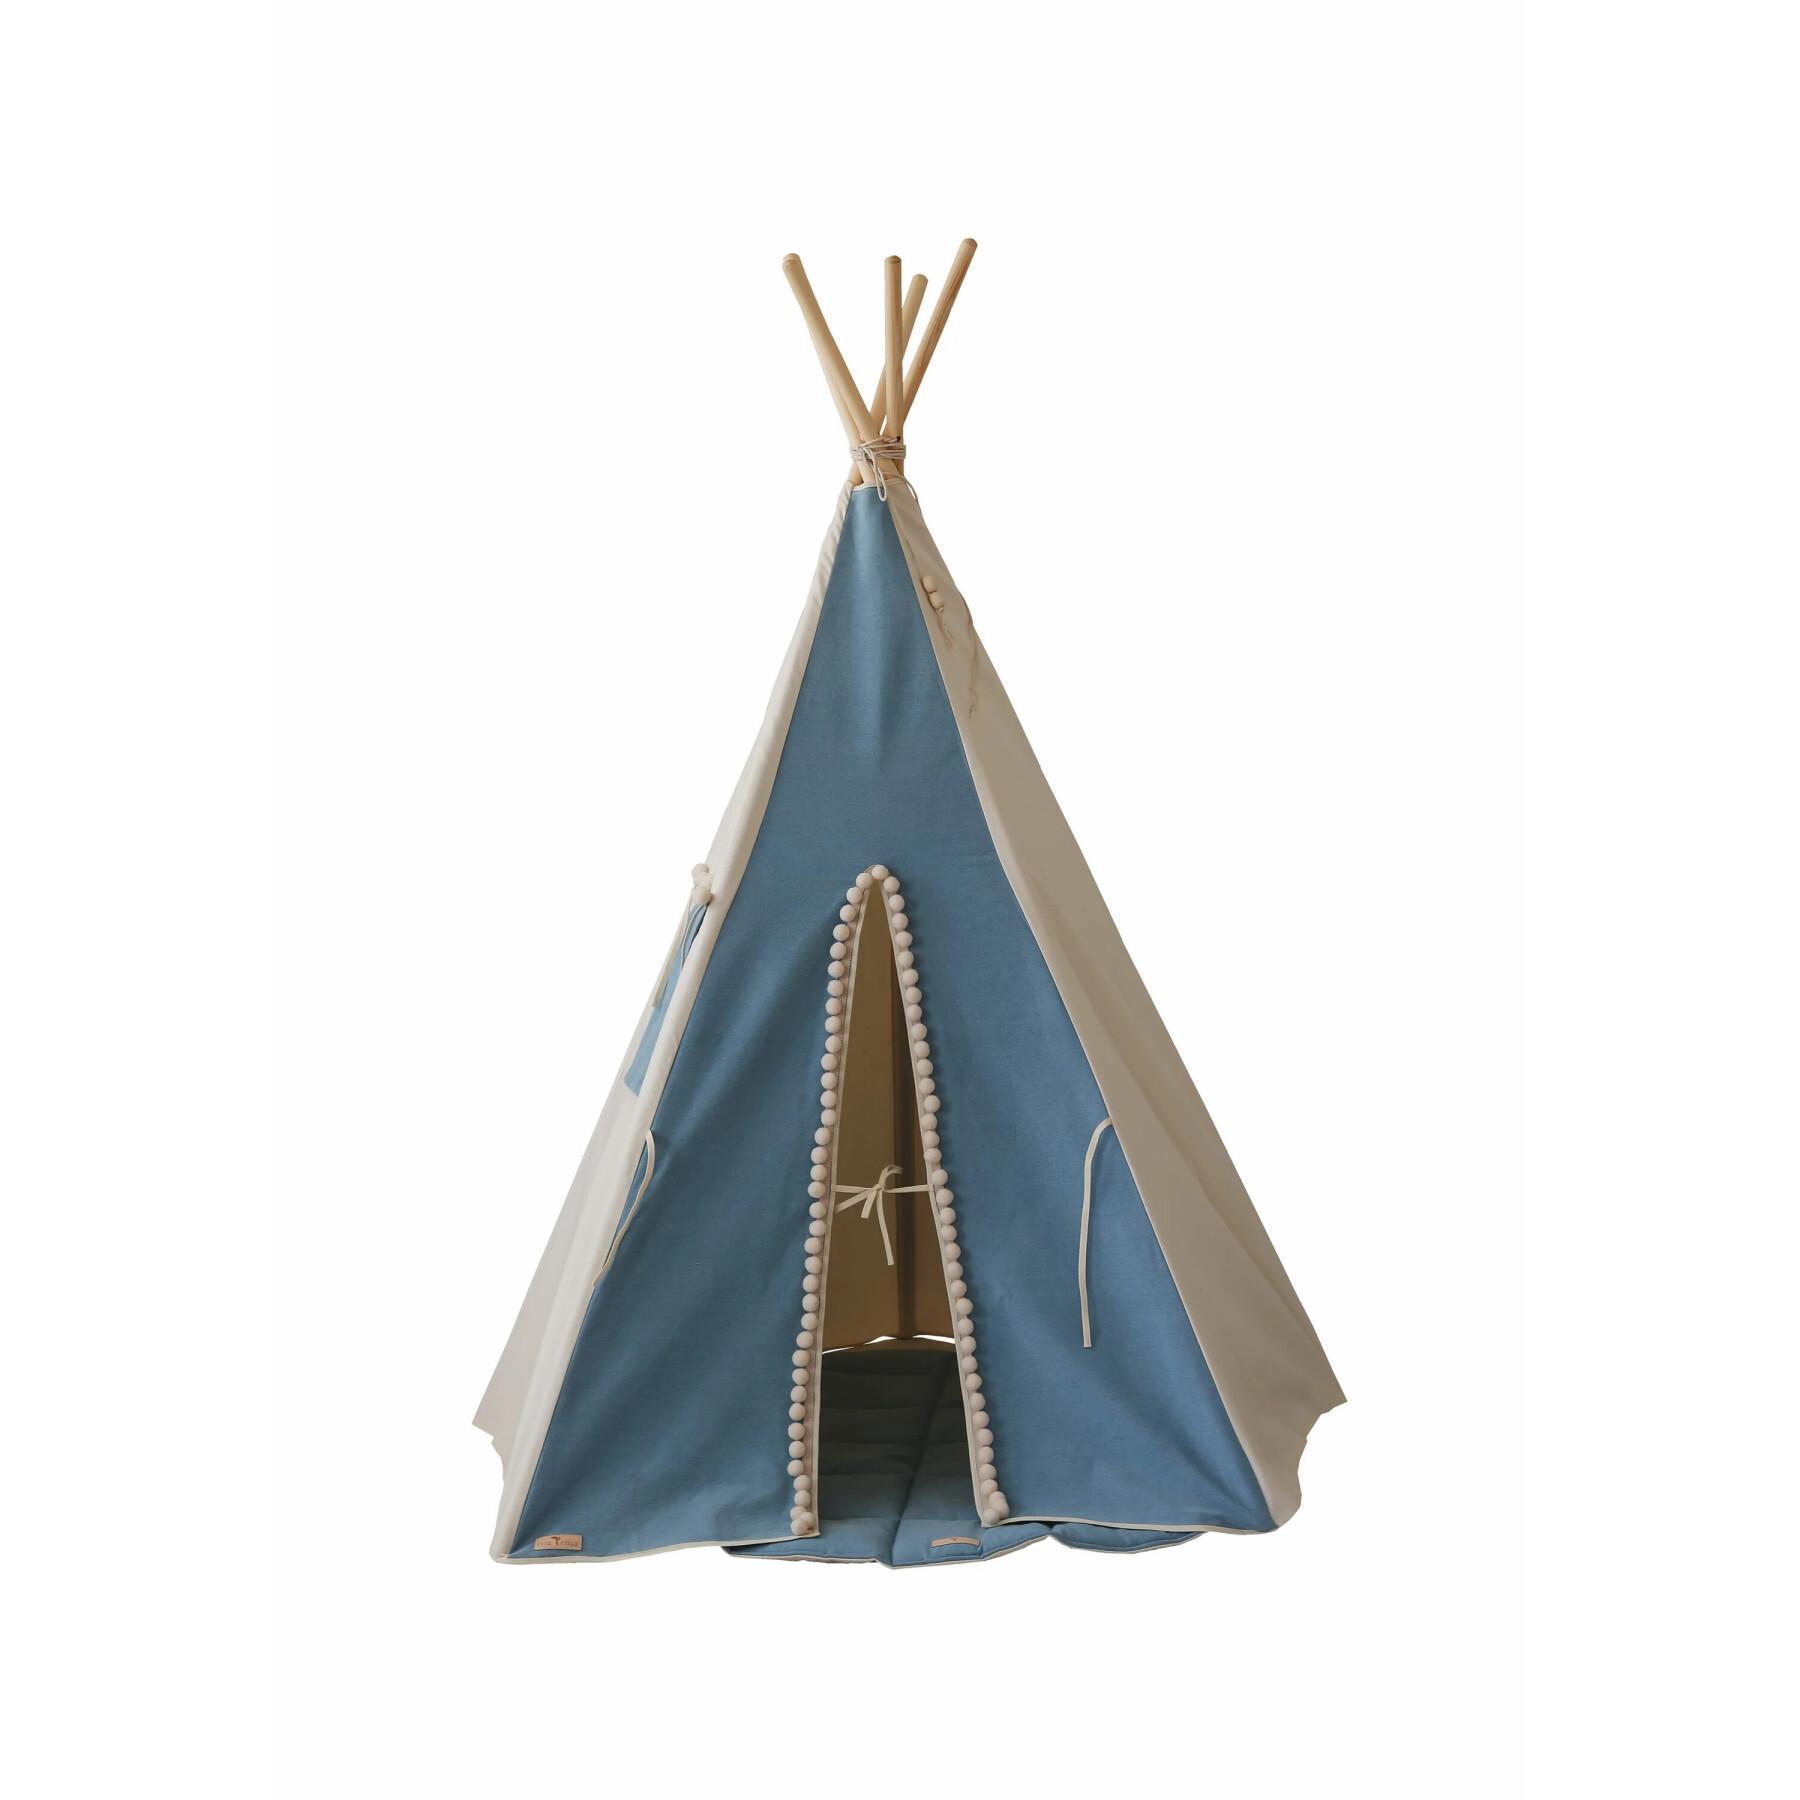 Children's tipi tent with pompons Moi Mili Jeans